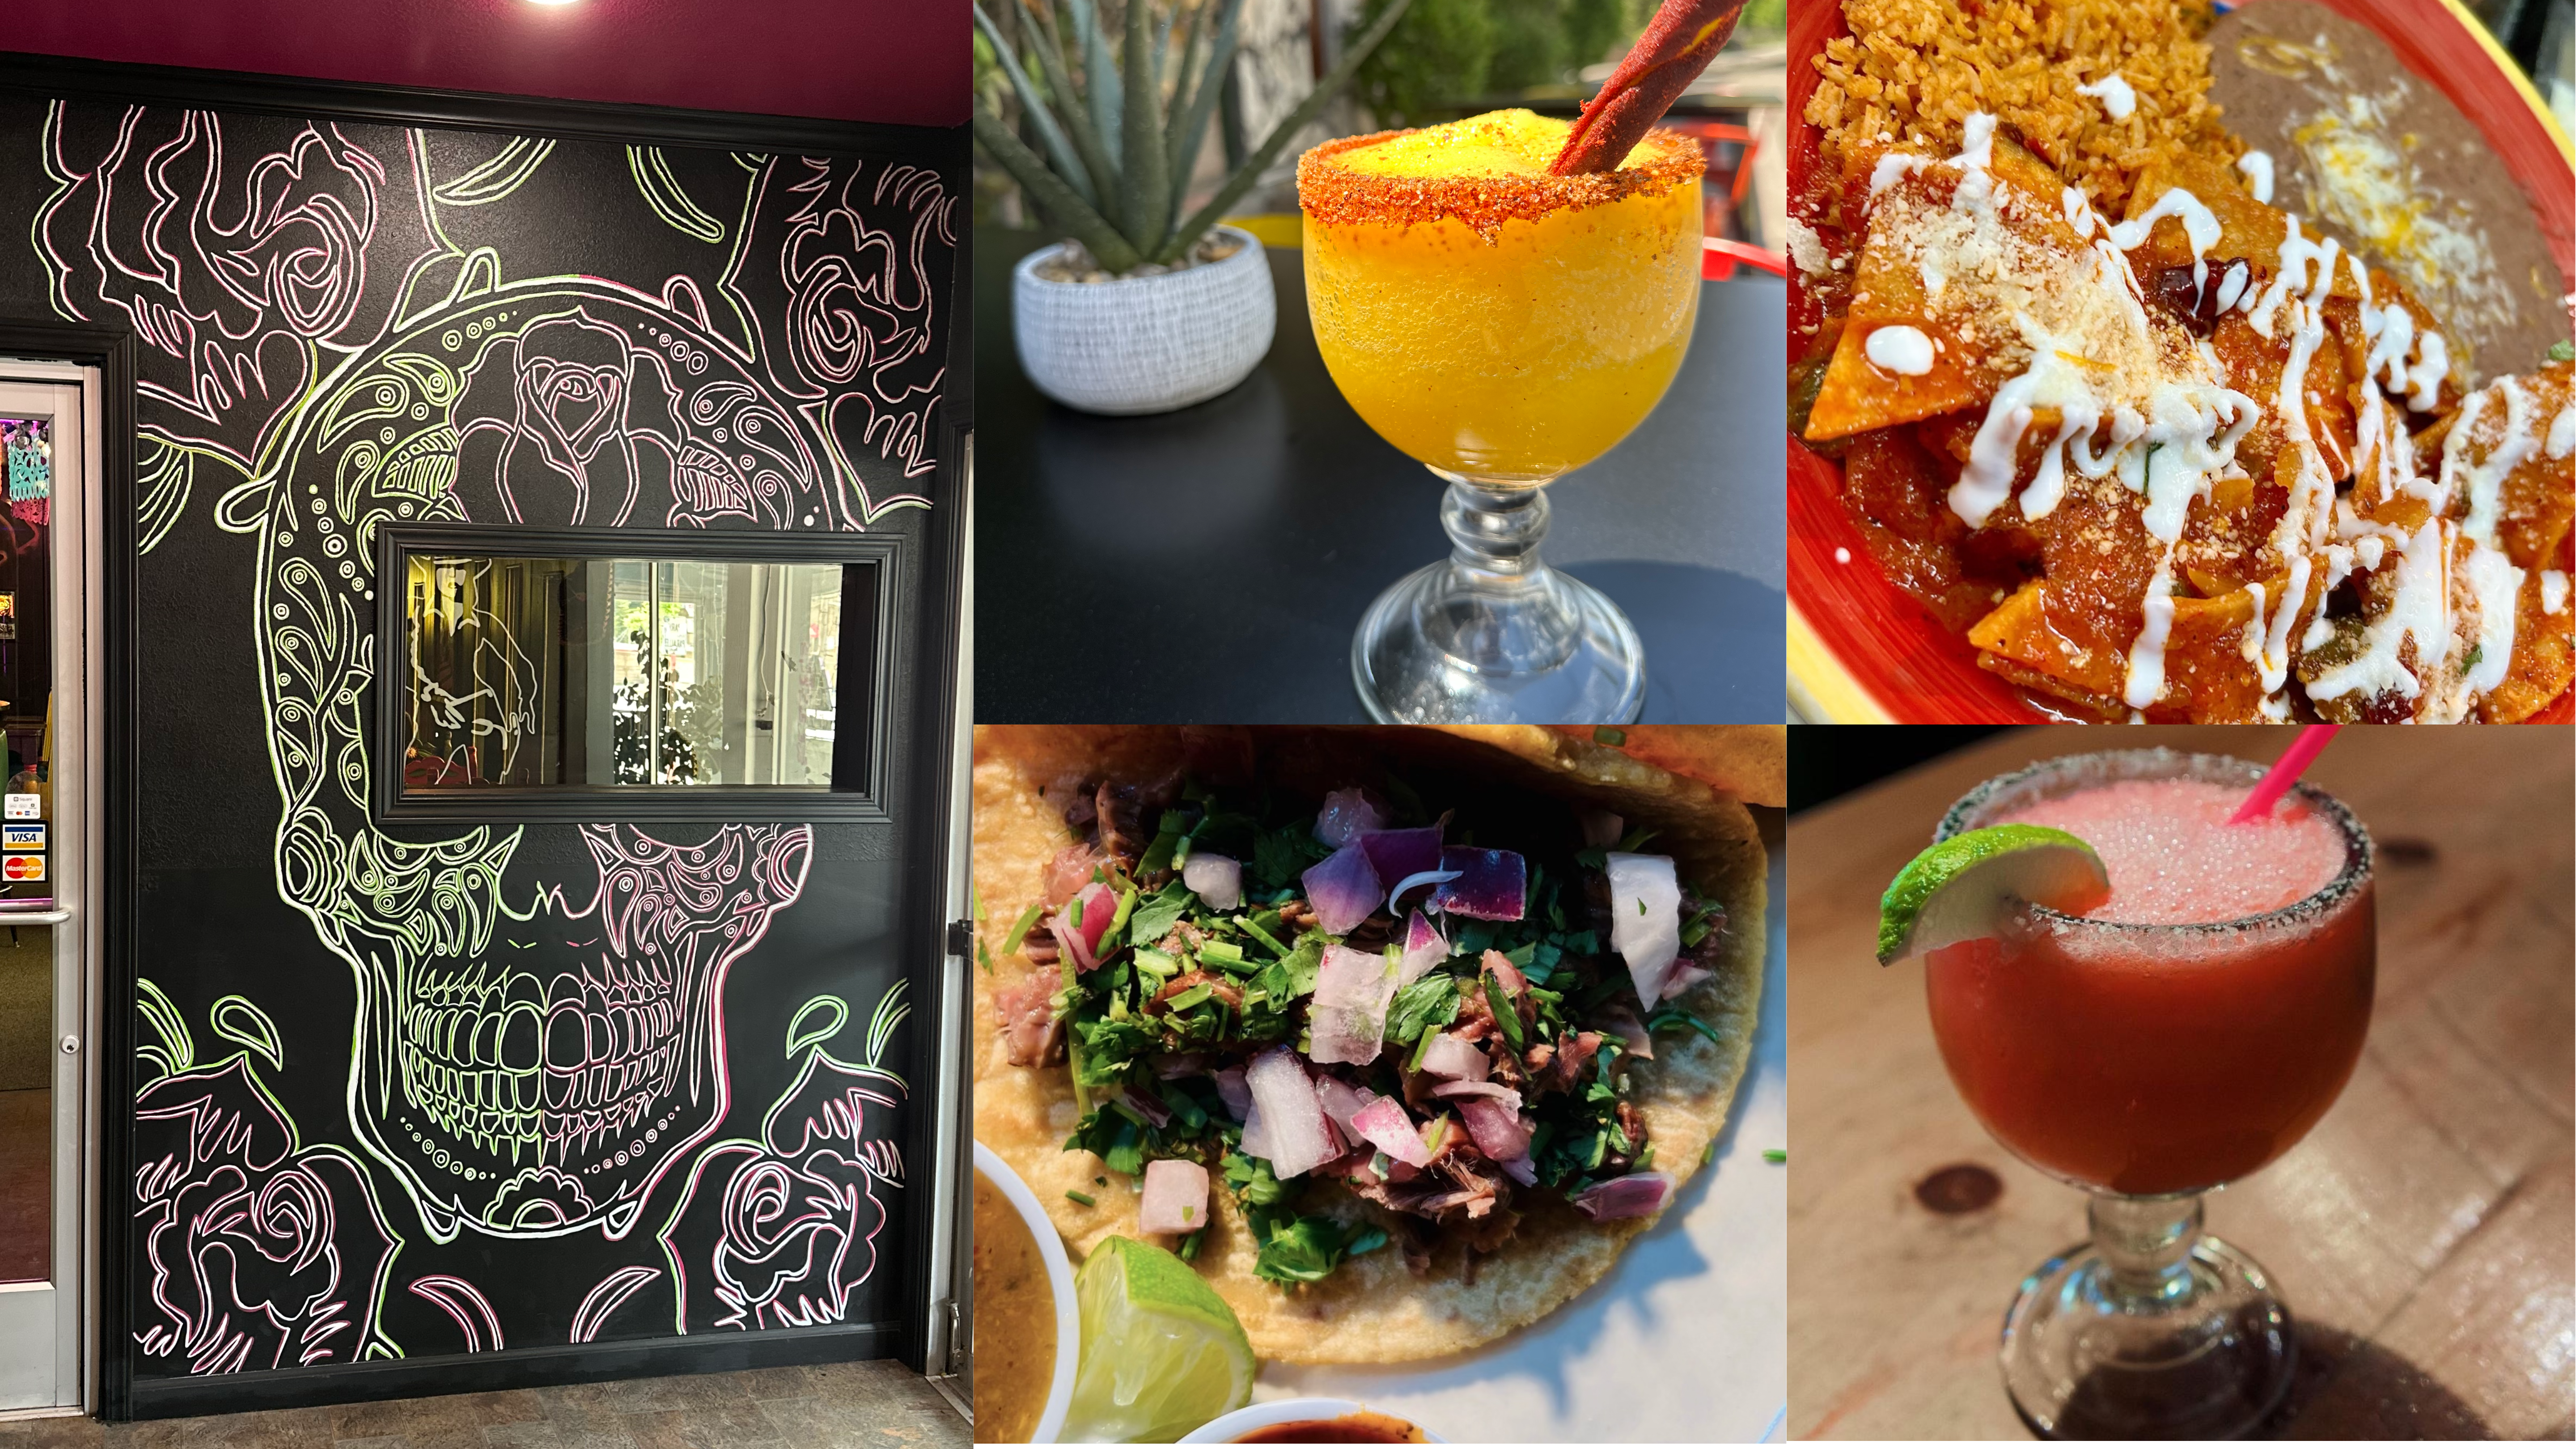 image of La Perla Cantina enchiladas, margaritas, tacos, and our skull painting